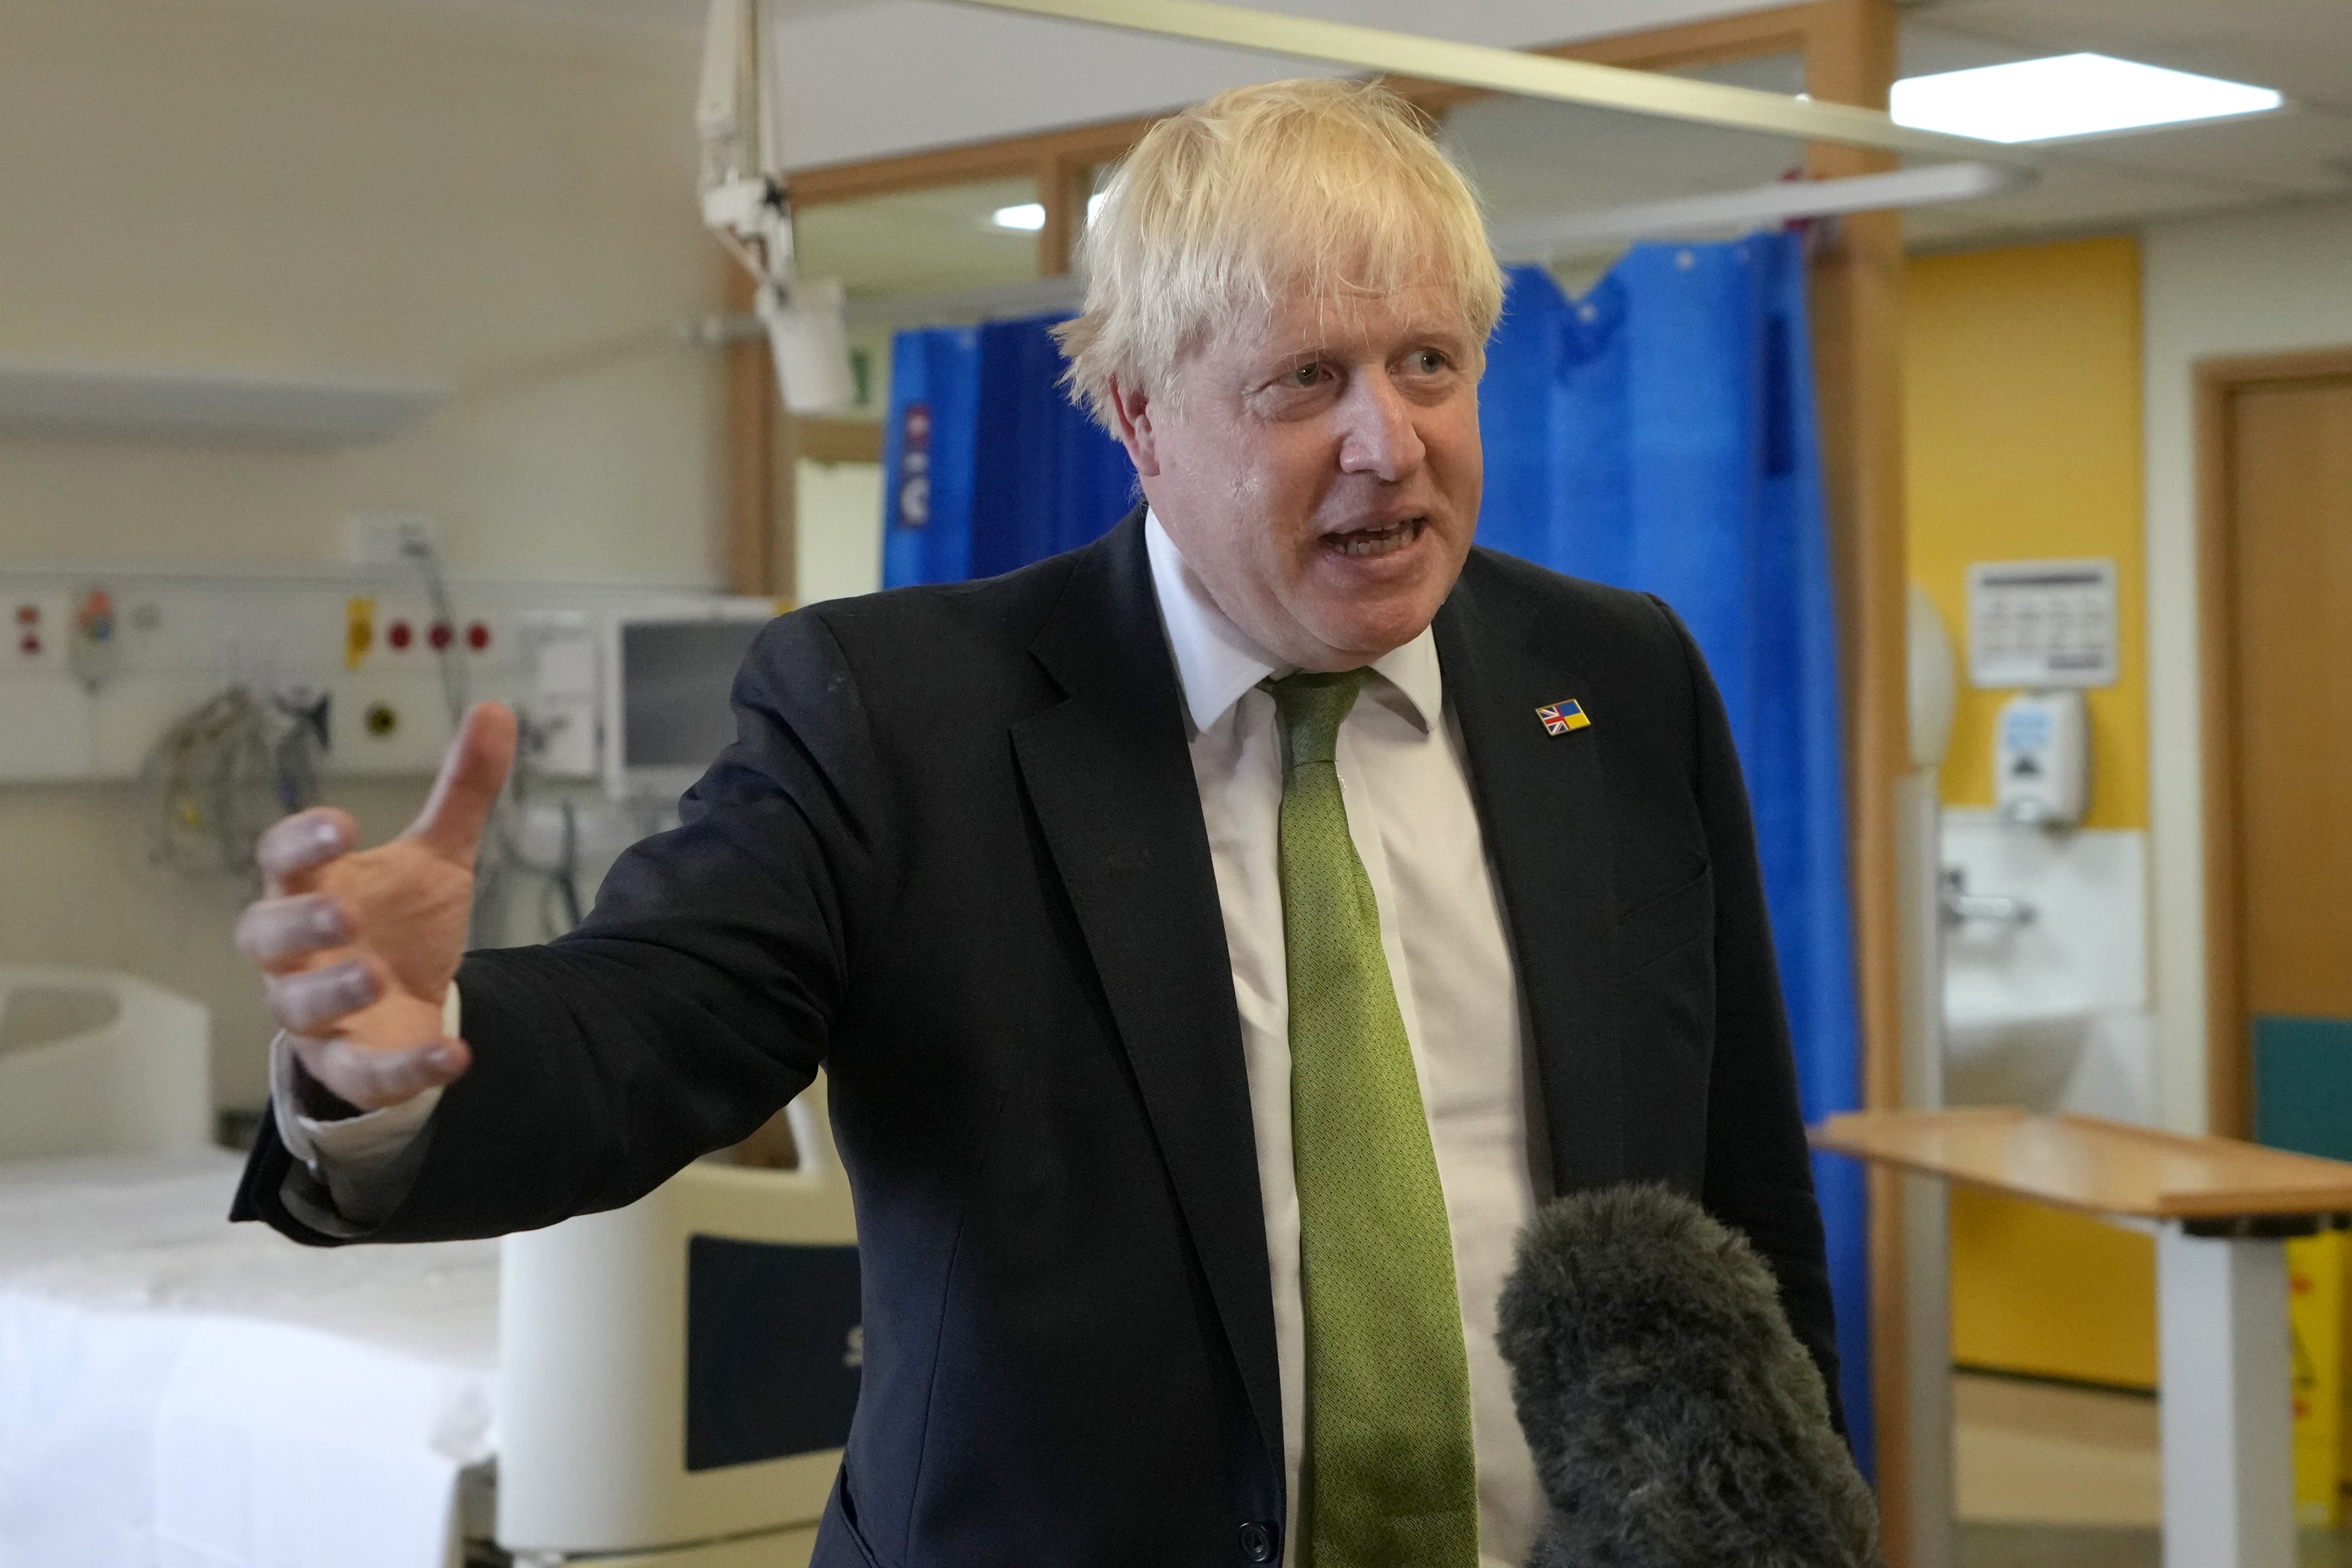 Outgoing Prime Minister Boris Johnson could try to make a comeback, a former Tory Cabinet minister has said (Kirsty Wigglesworth/PA)